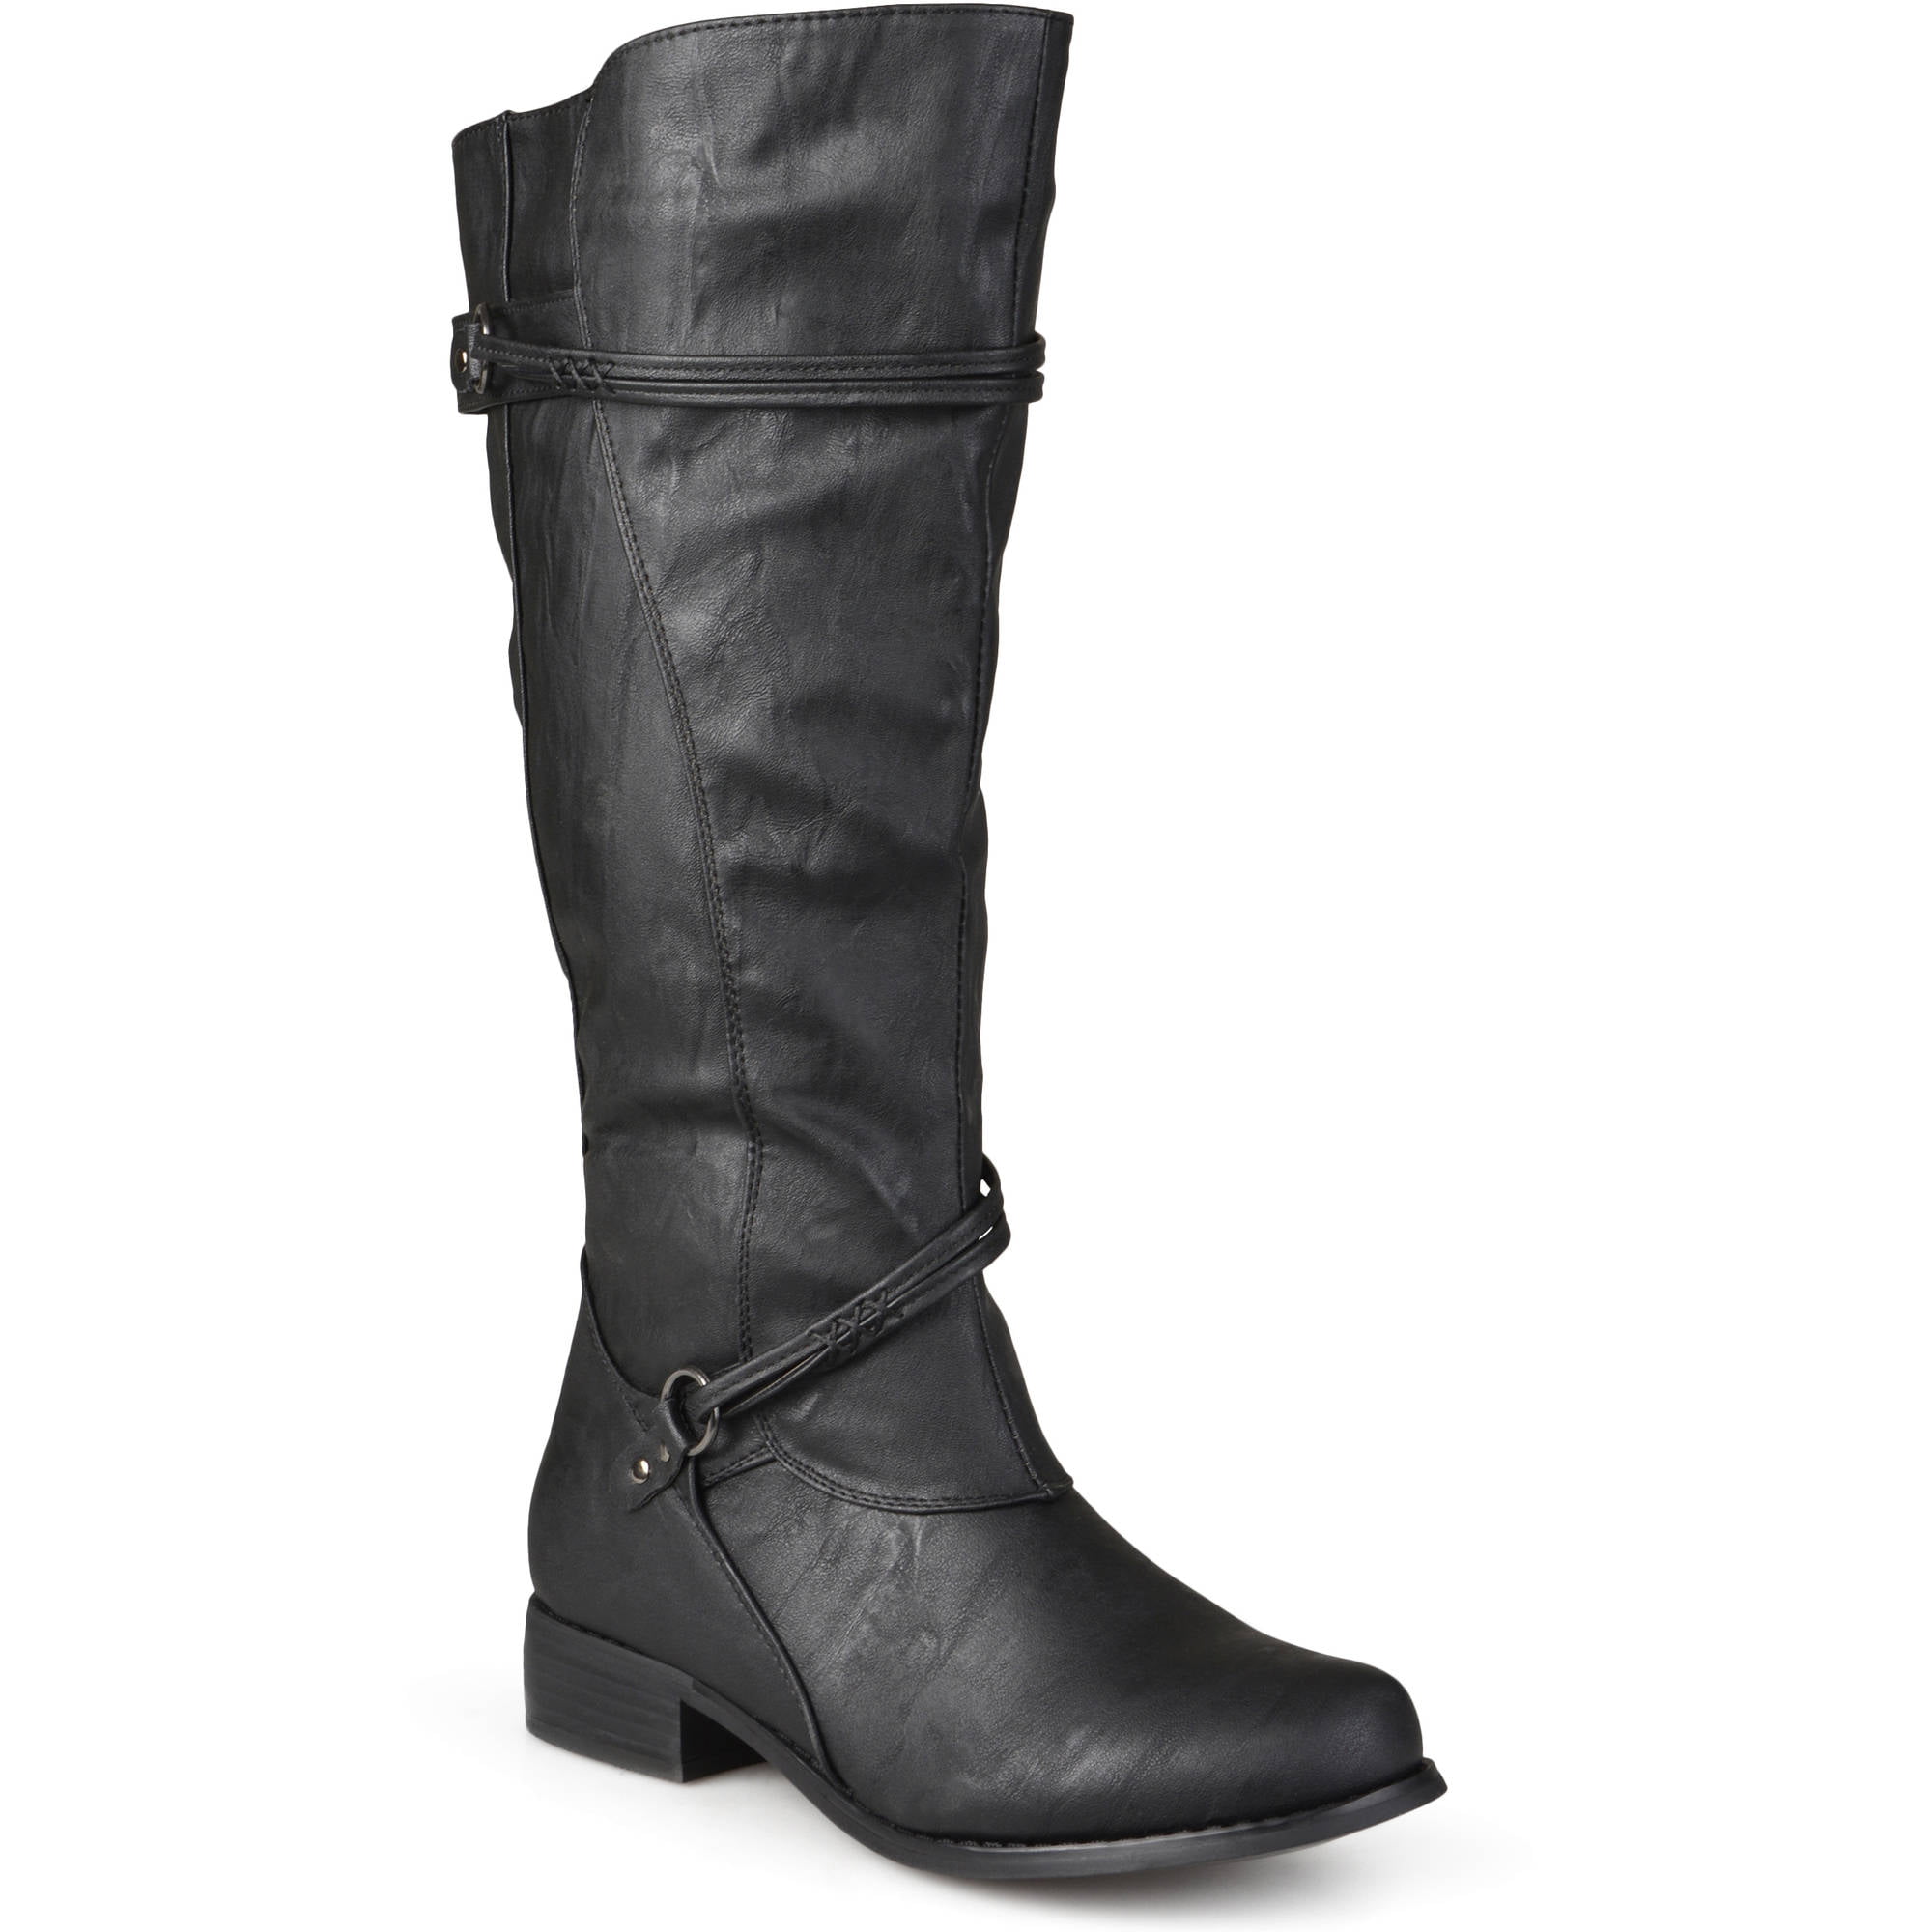 Brinley Co. - Women's Extra Wide Calf Knee High Faux Leather Riding ...